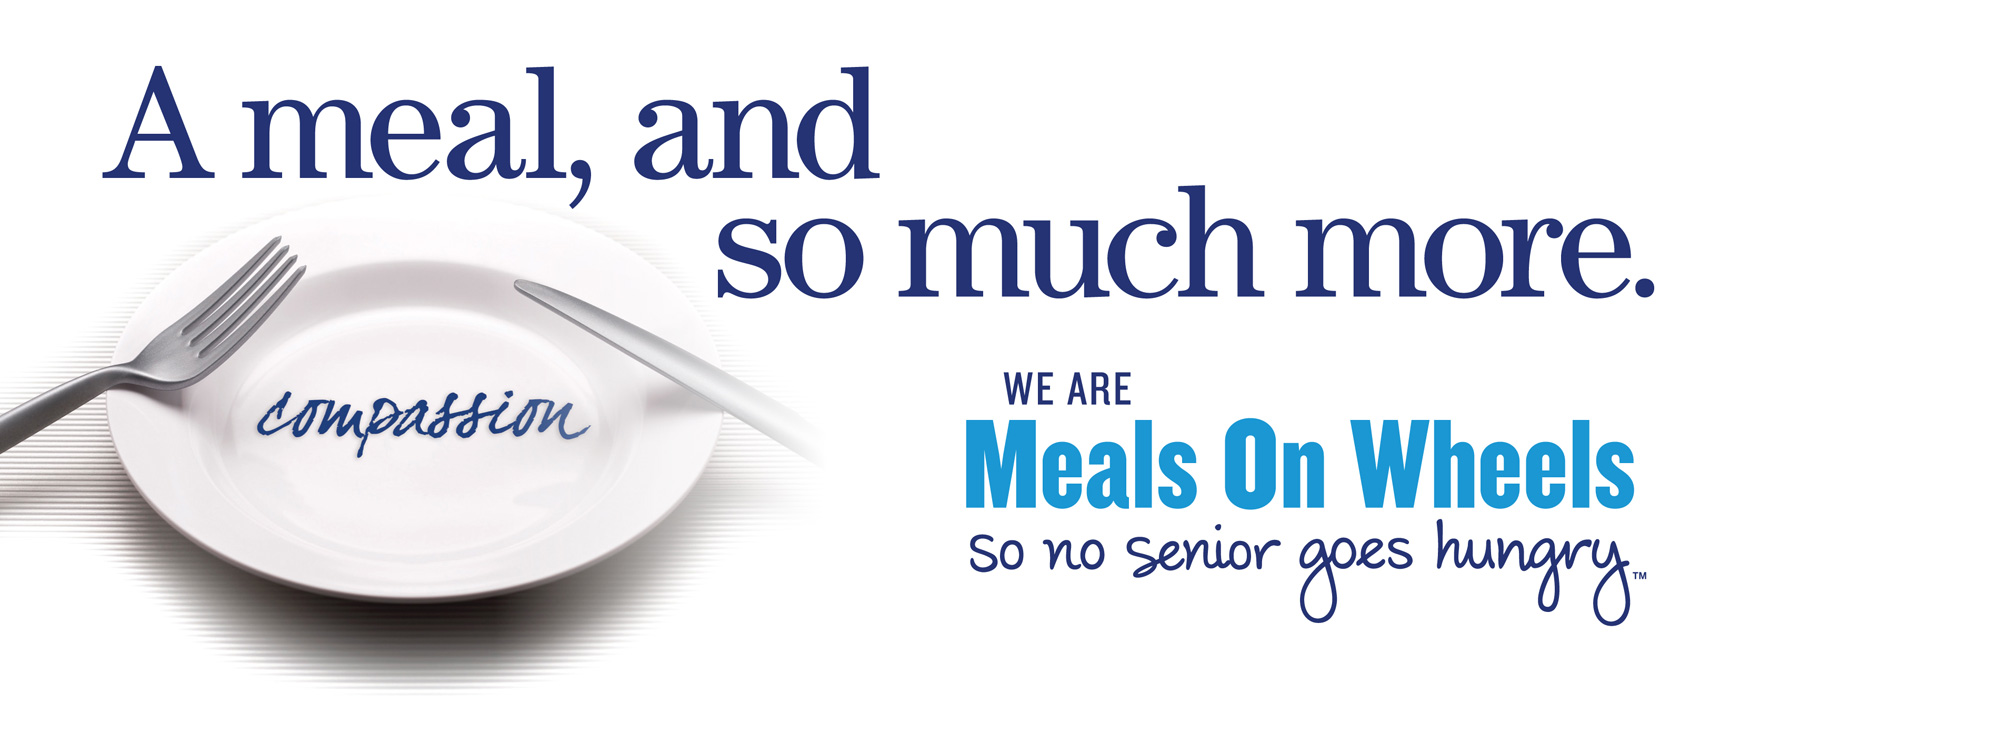 What is the number and address for Meals on Wheels for Sedona or Cottonwood, AZ?